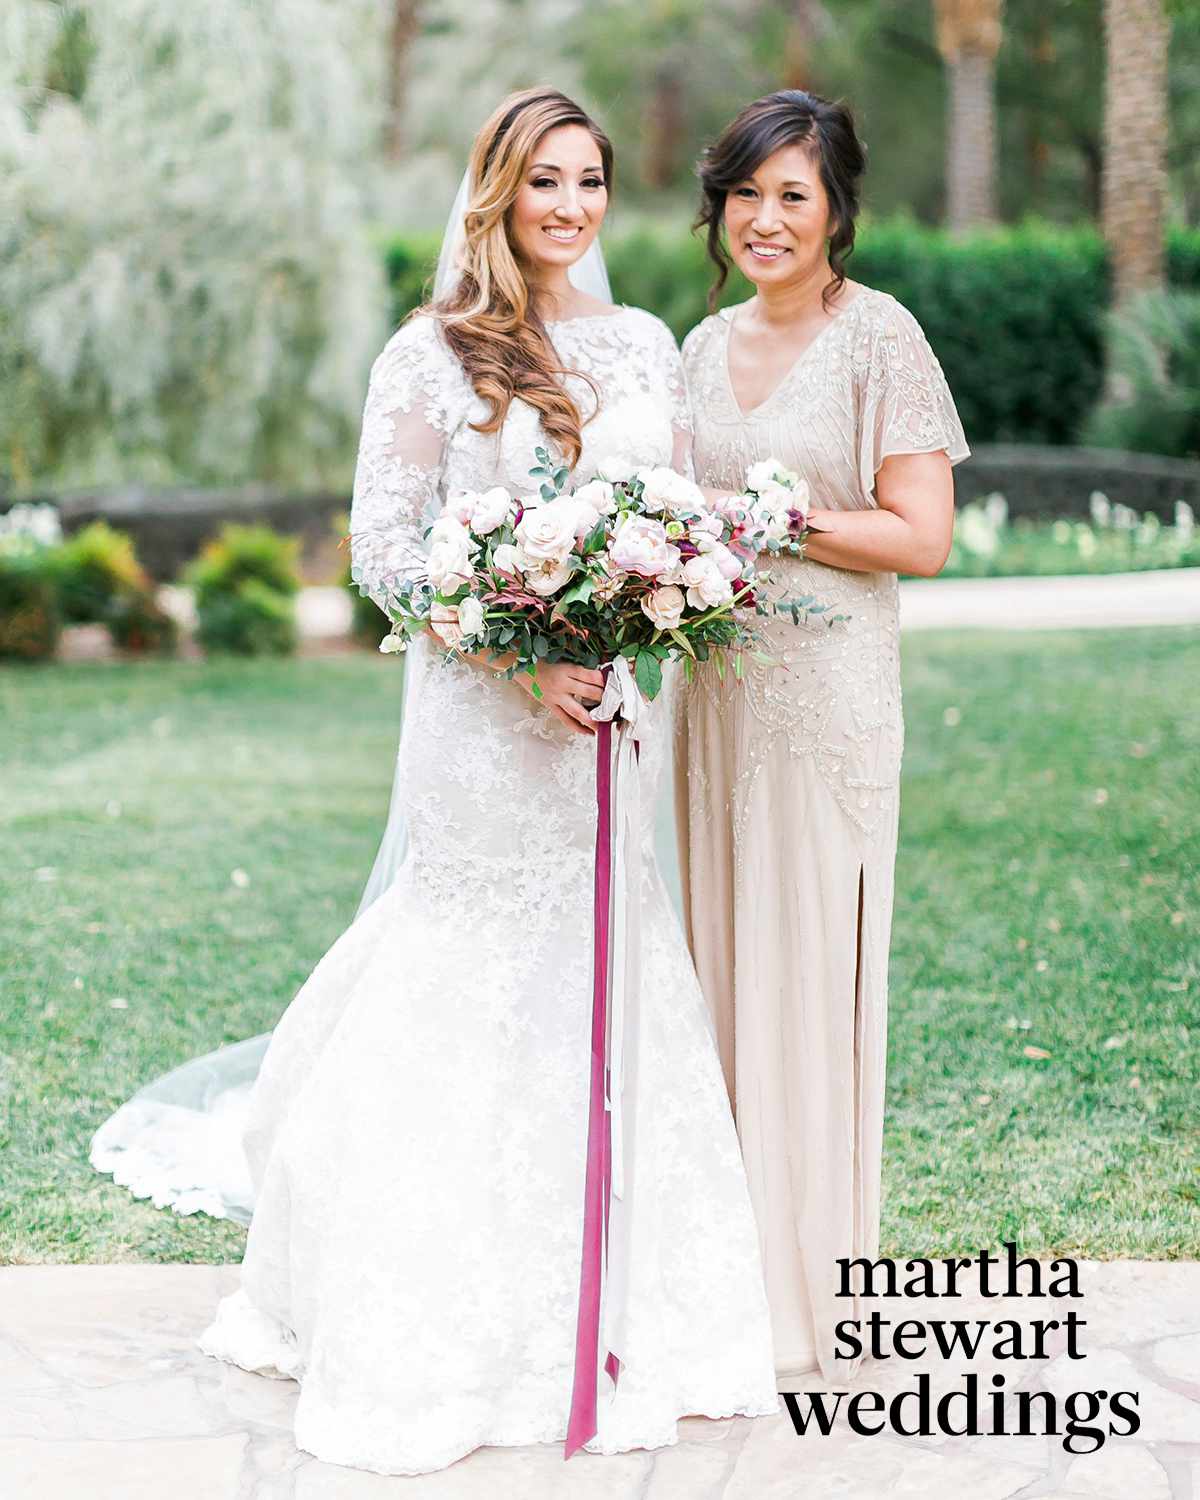 Reception Spread Mathis The Prettiest Beige and Gold Dresses for the Mothers of the Bride and Groom  | Martha Stewart